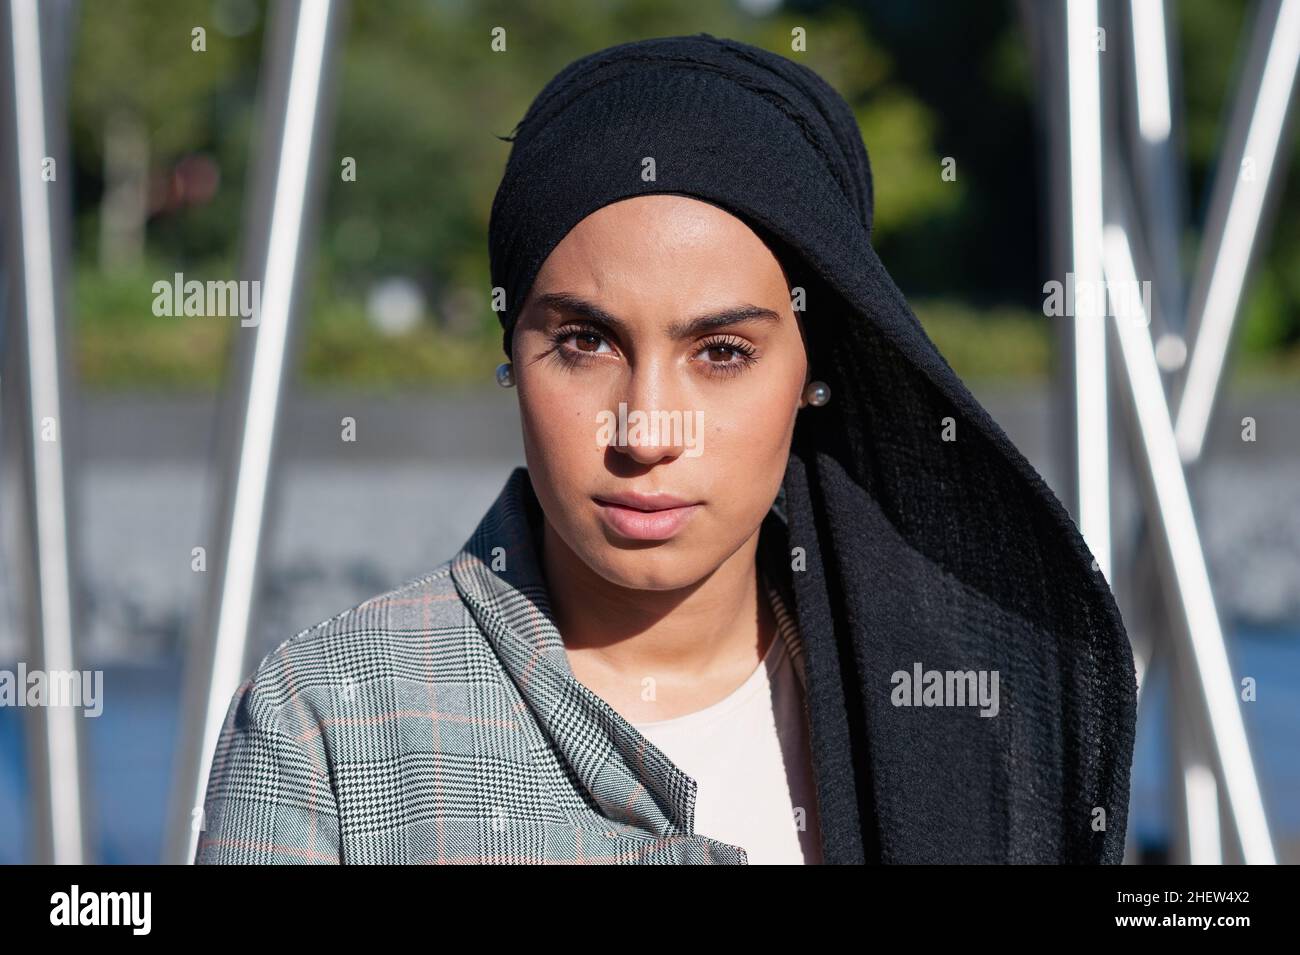 Portrait of a muslim adult woman wearing a black headscarf looking at camera in the park Stock Photo